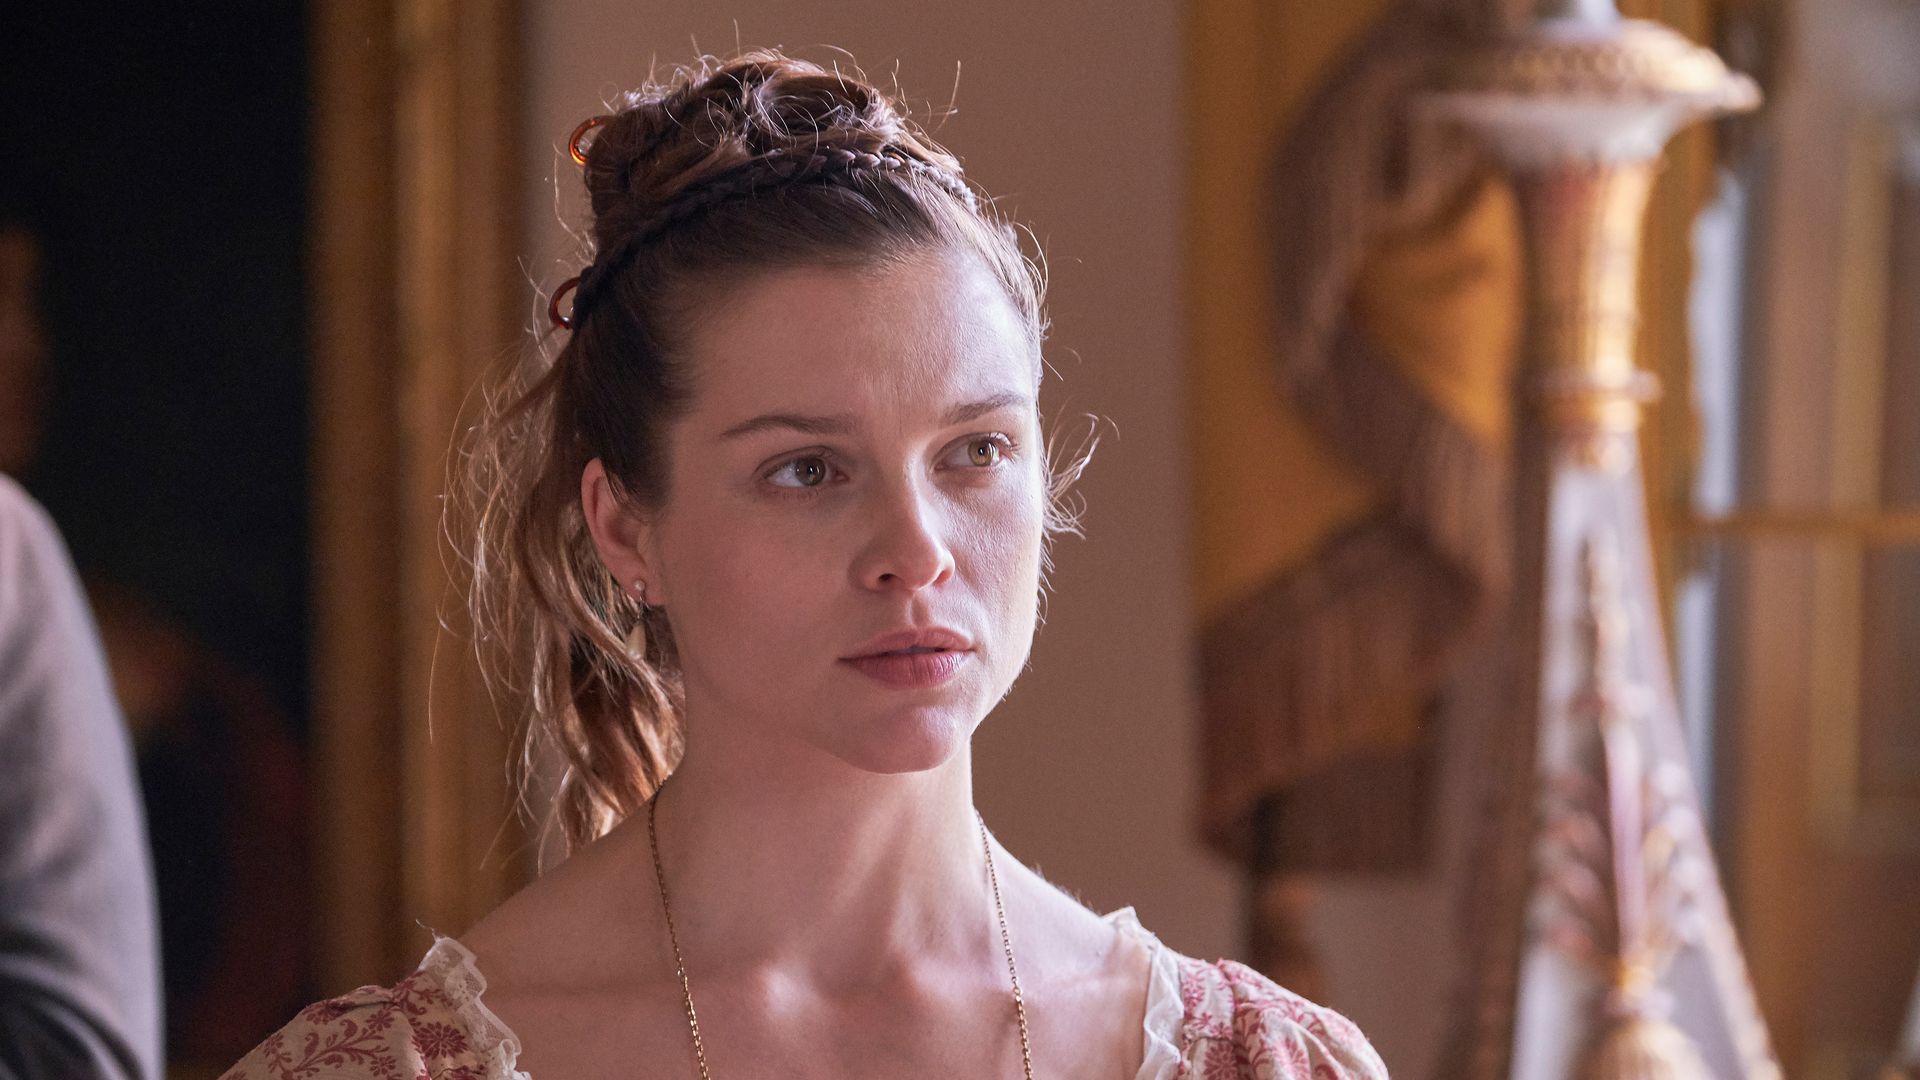 Sophie Cookson as Madame Benham in The Confessions of Frannie Langton